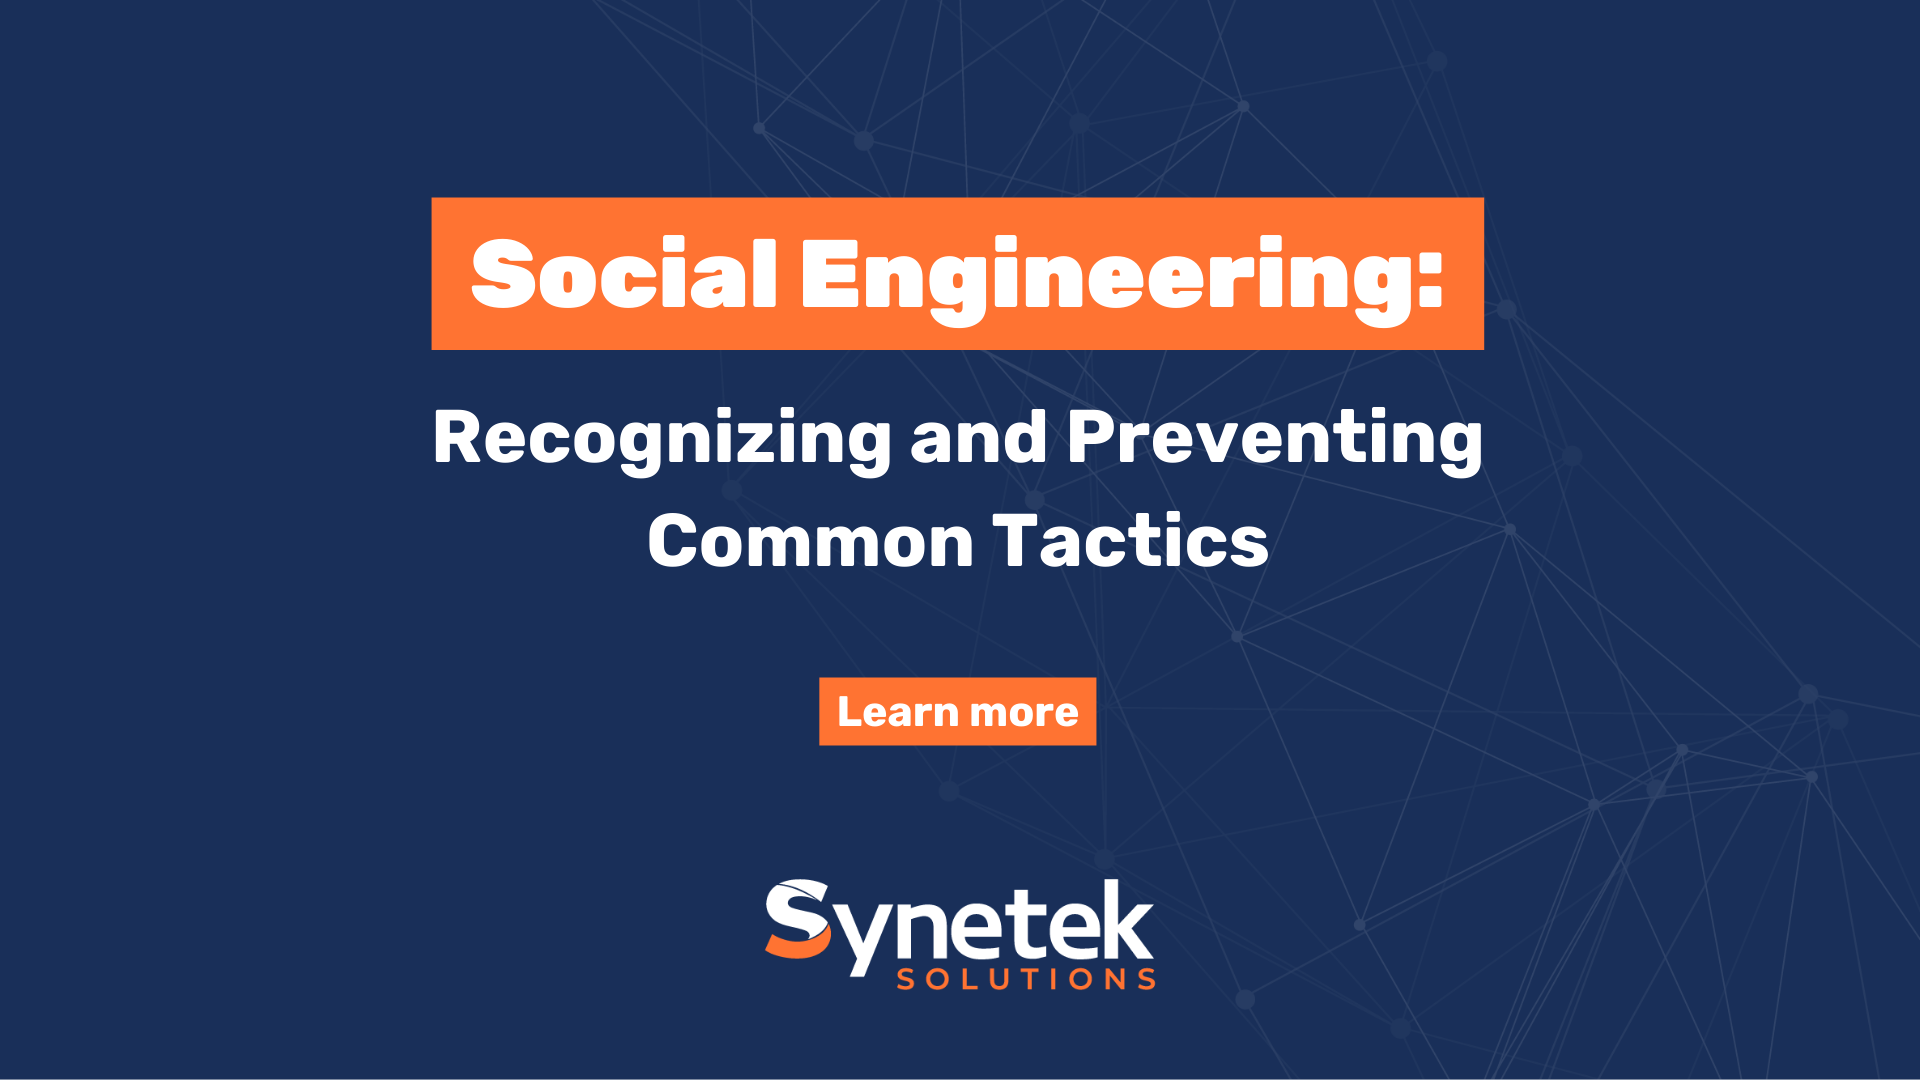 Social Engineering: Recognizing and Preventing Common Tactics